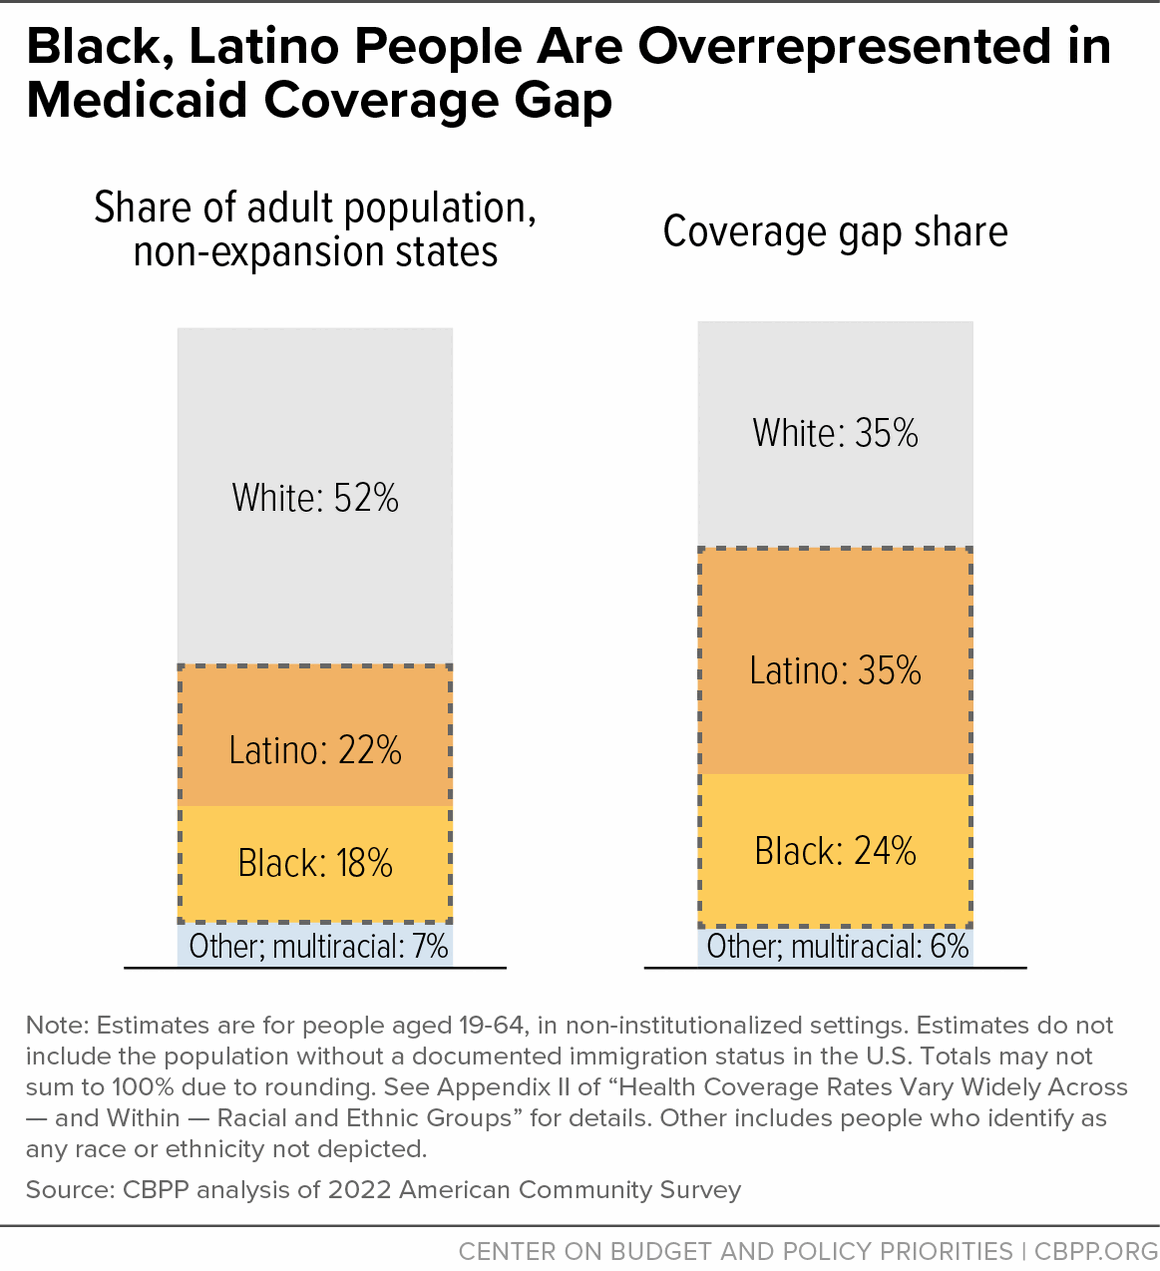 Black, Latino People Are Overrepresented in Medicaid Coverage Gap